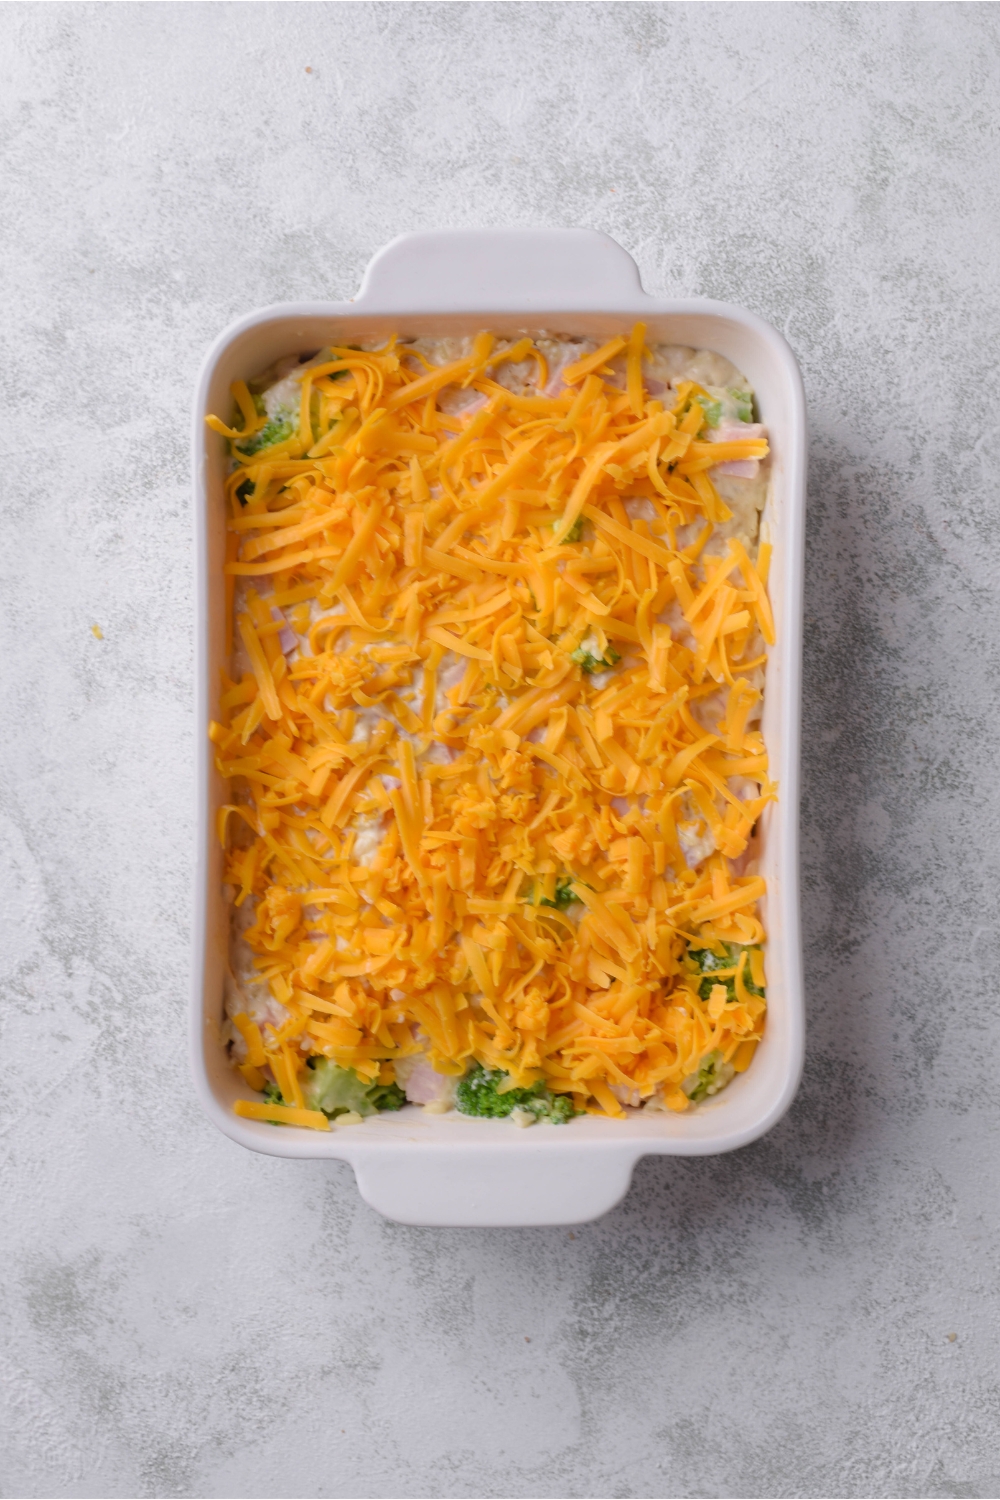 A baking dish filled with unbaked ham casserole covered in a layer of shredded cheese.